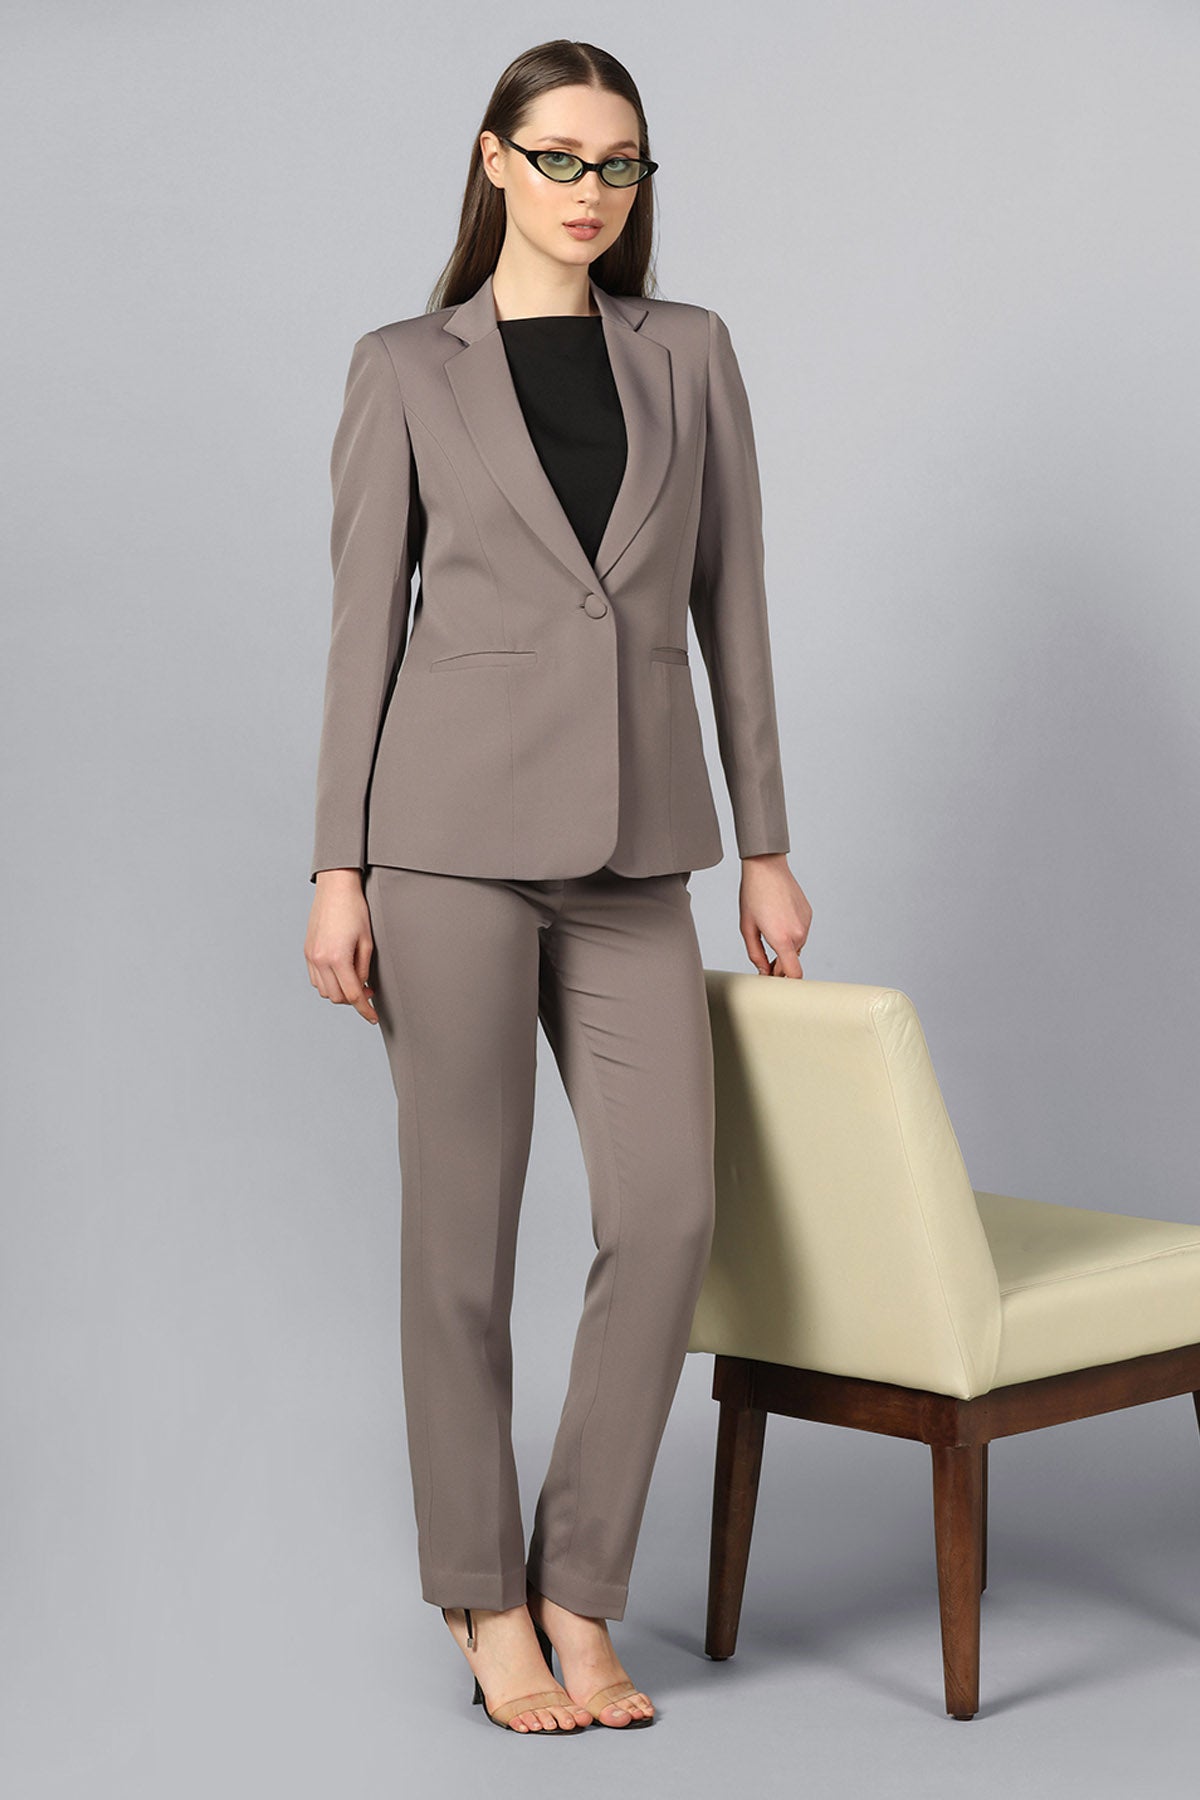 Buy PowerSutra Single Button Pant Suit For Women Available online at  ScrollnShops